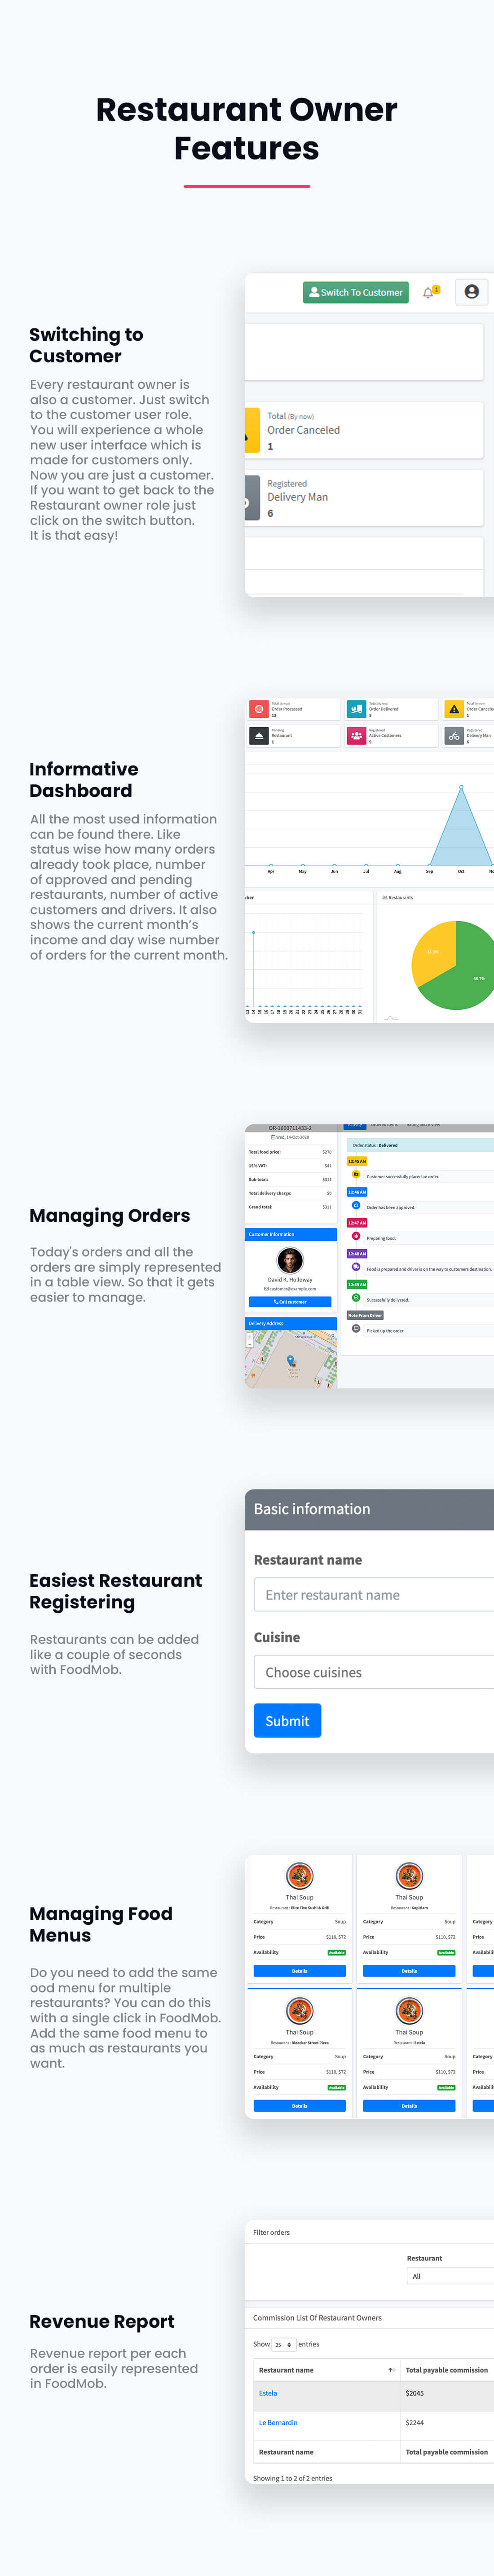 FoodMob - An Online Multi Restaurant Food Ordering and Management with Delivery System - 8